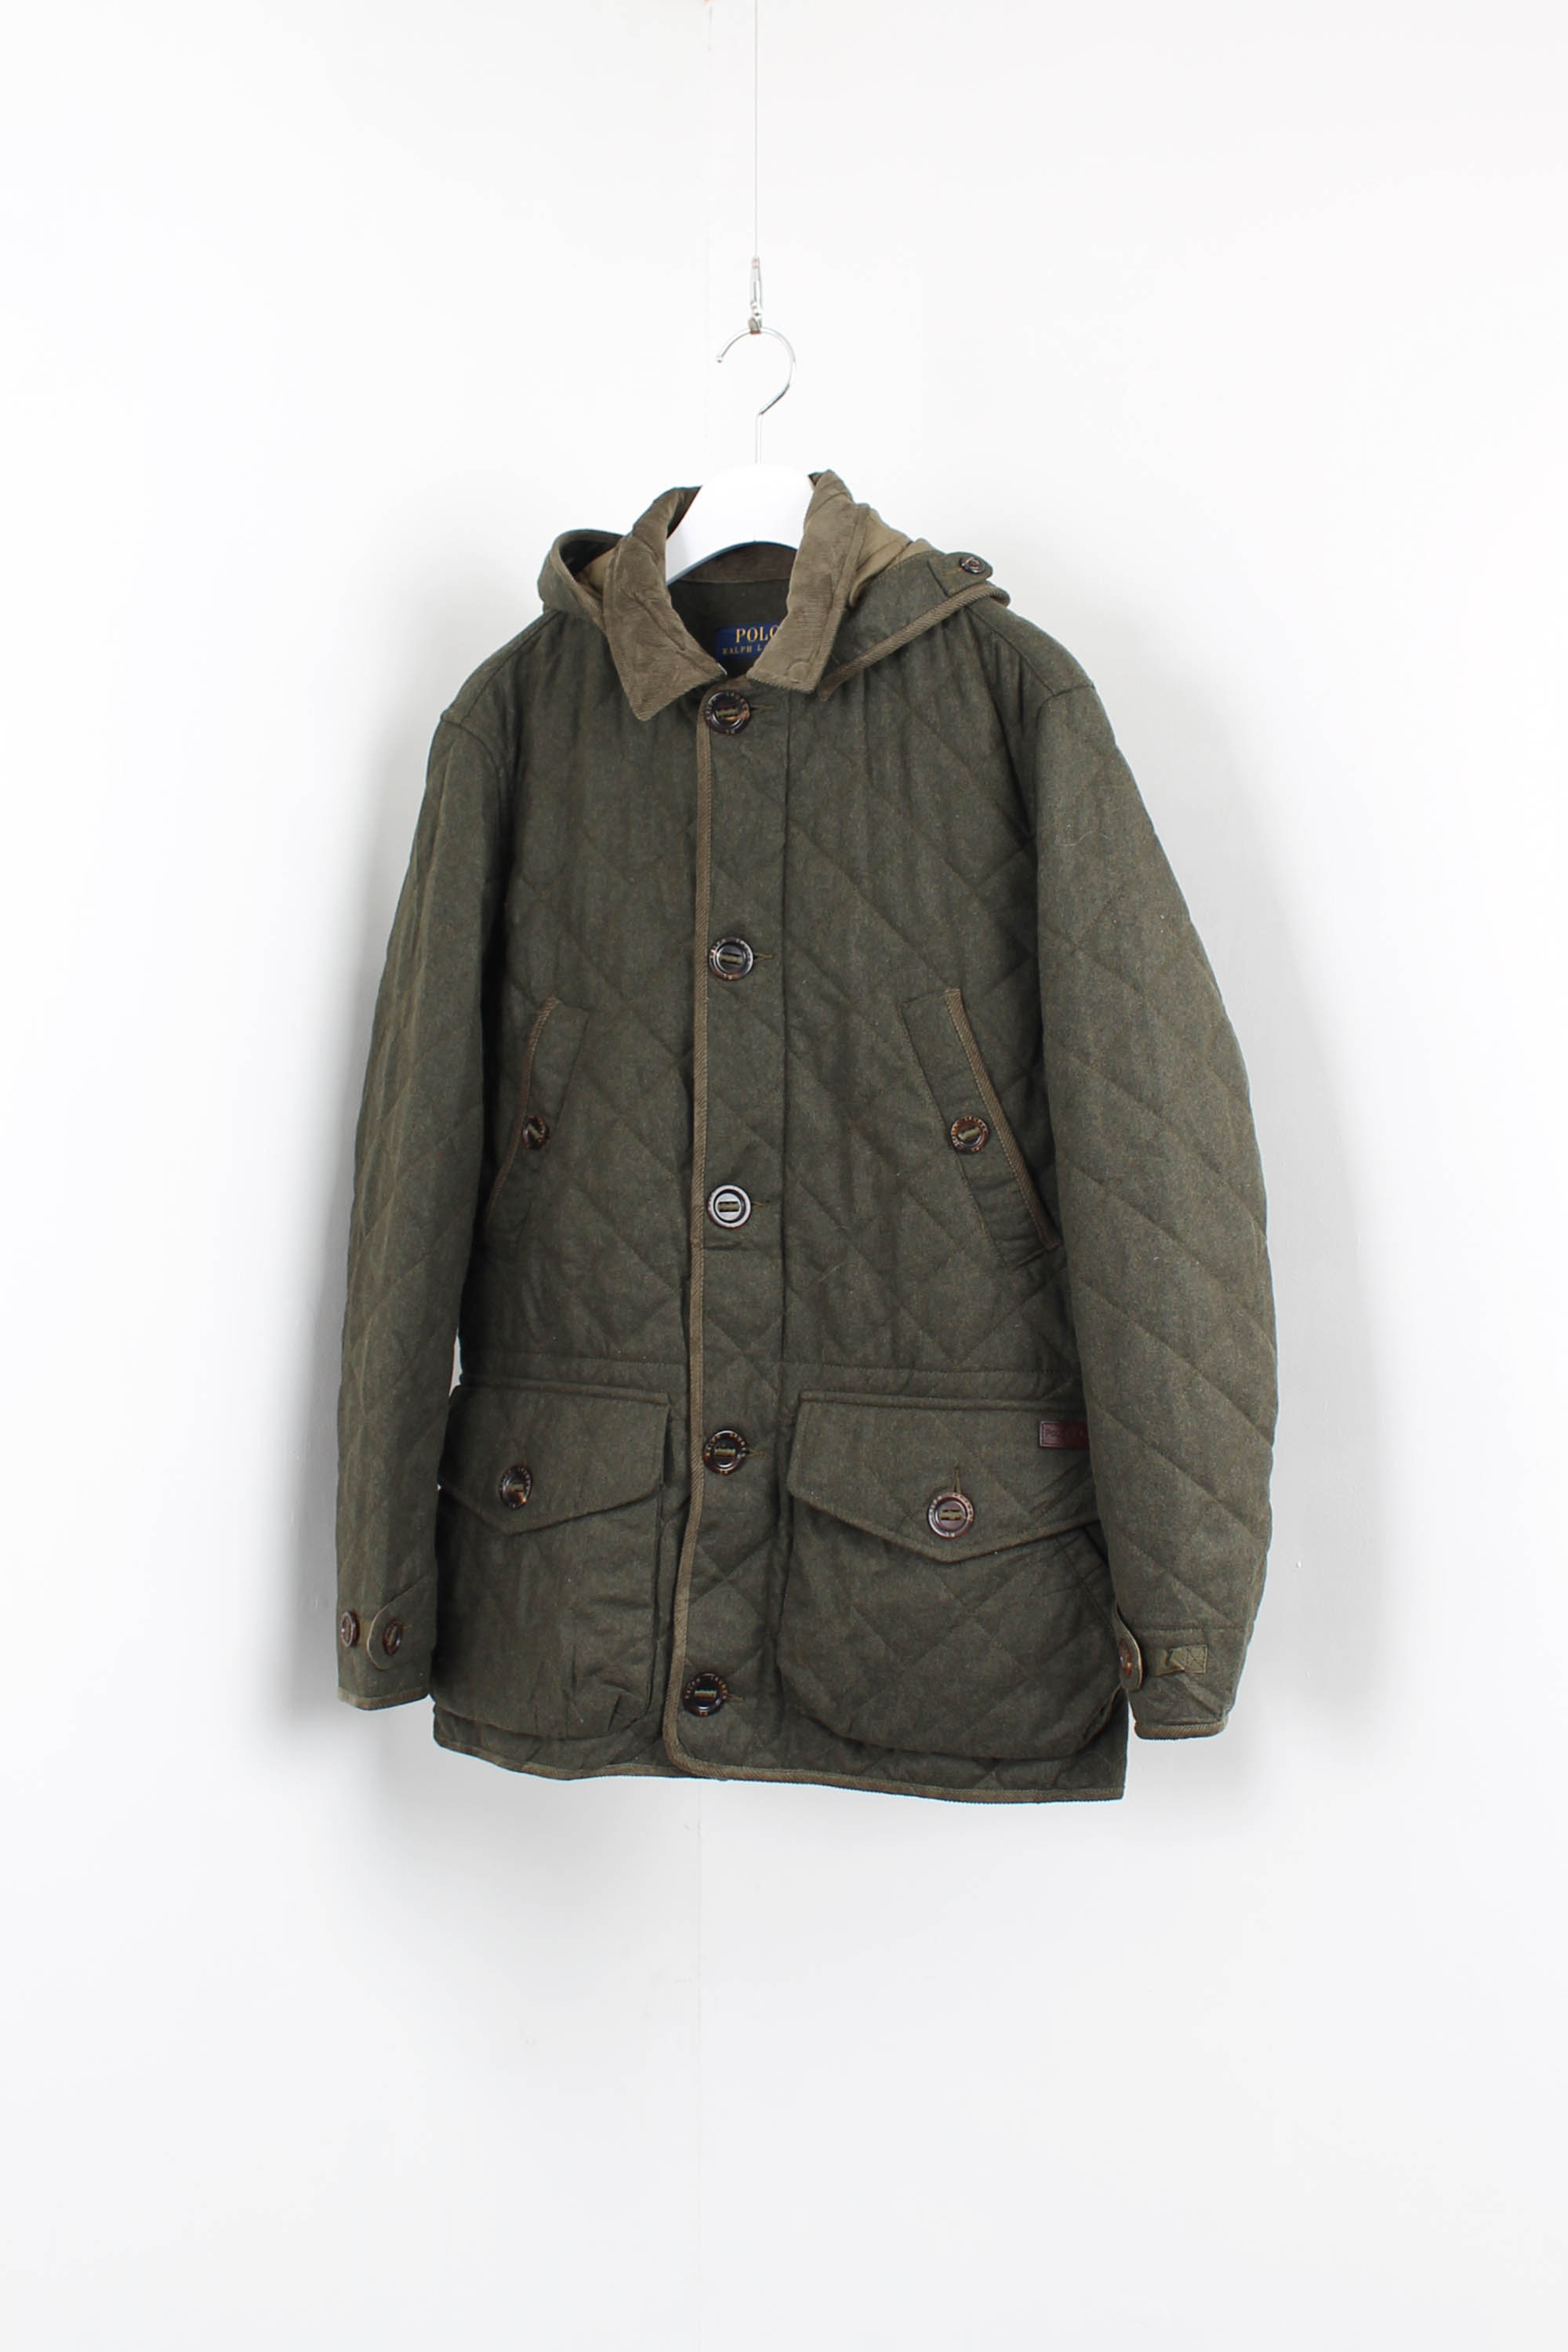 polo ralph lauren quilted jacket